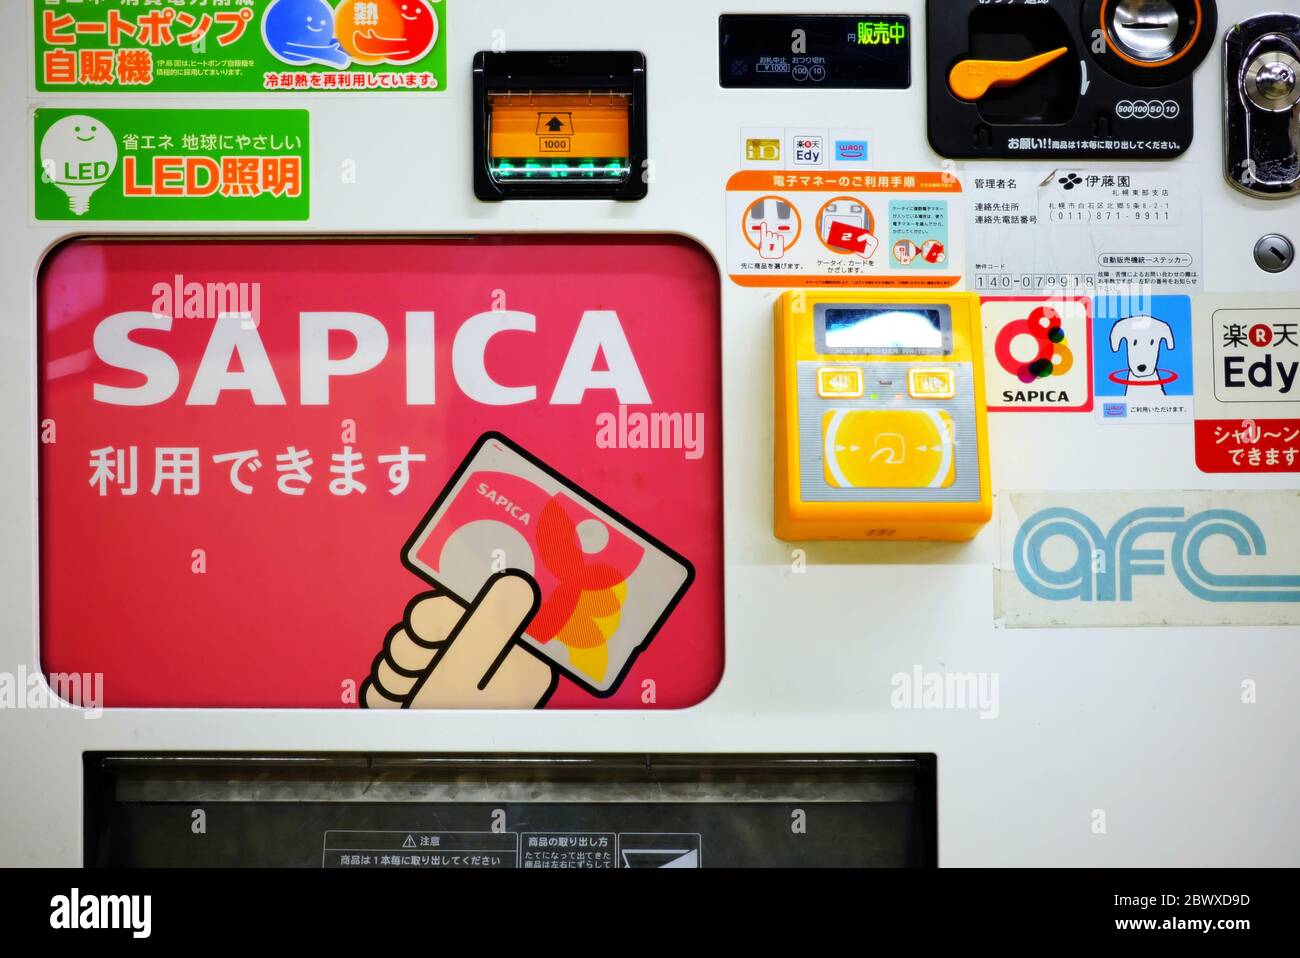 SAPPORO, JAPAN - NOVEMBER 11, 2019: Close up Sapica card or Sapporo IC card selling machine. Sapica is smart card ticket for transportation in Sapporo Stock Photo